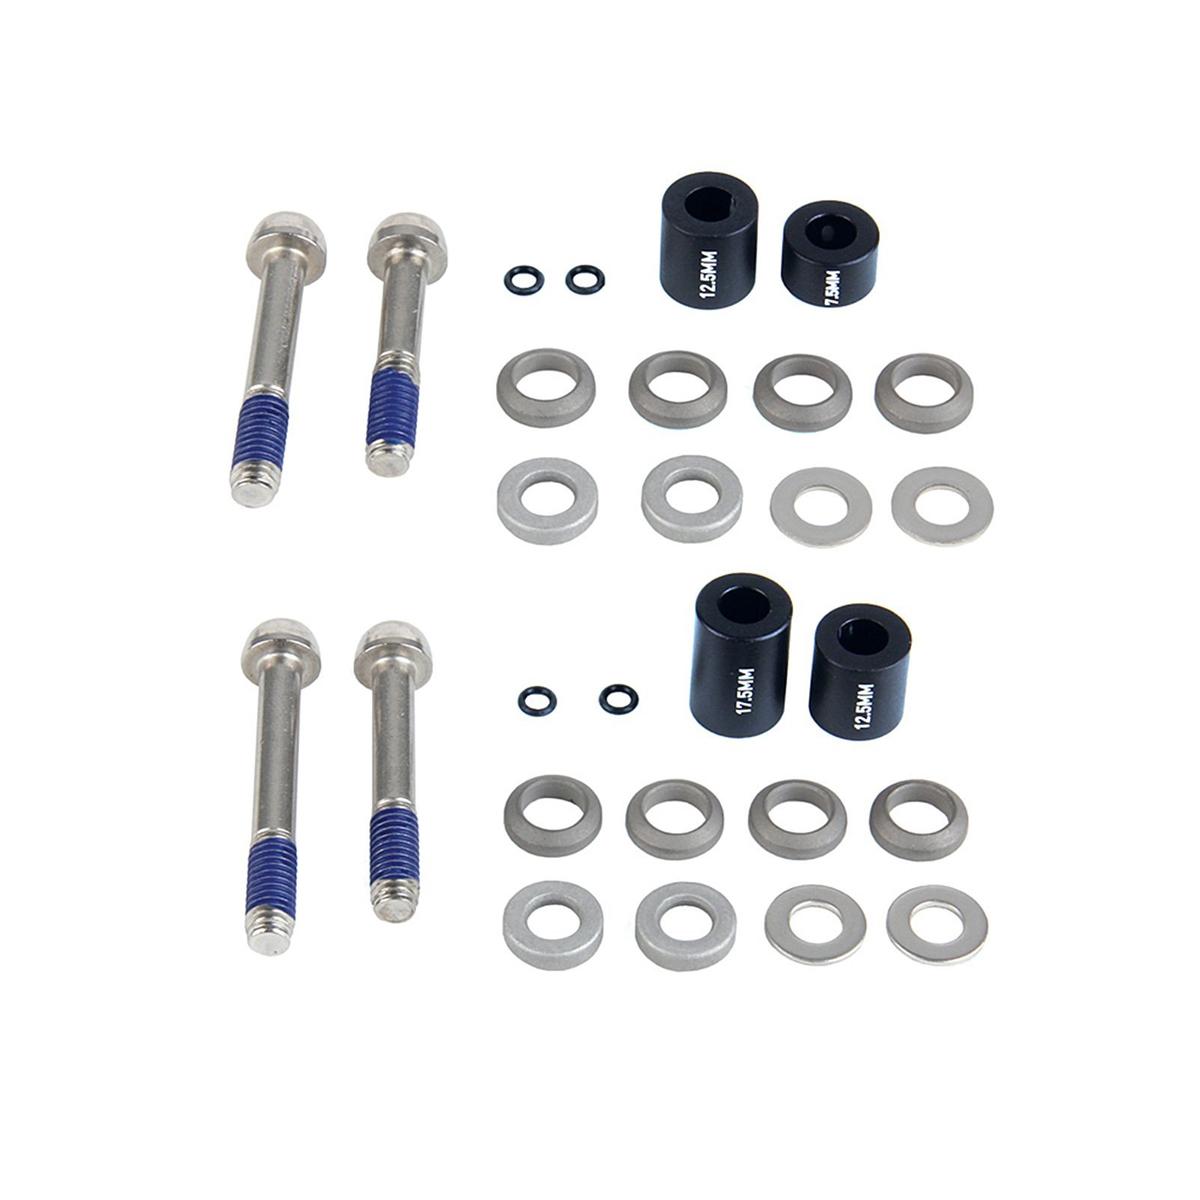 Post Bracket - 20 P (front180/rear 160) Includes Stainless Caliper Mounting Bolts (cps & Standard) Increased Depth For Fitment Of All Calipers Including Guide Ultimate                                                                                        